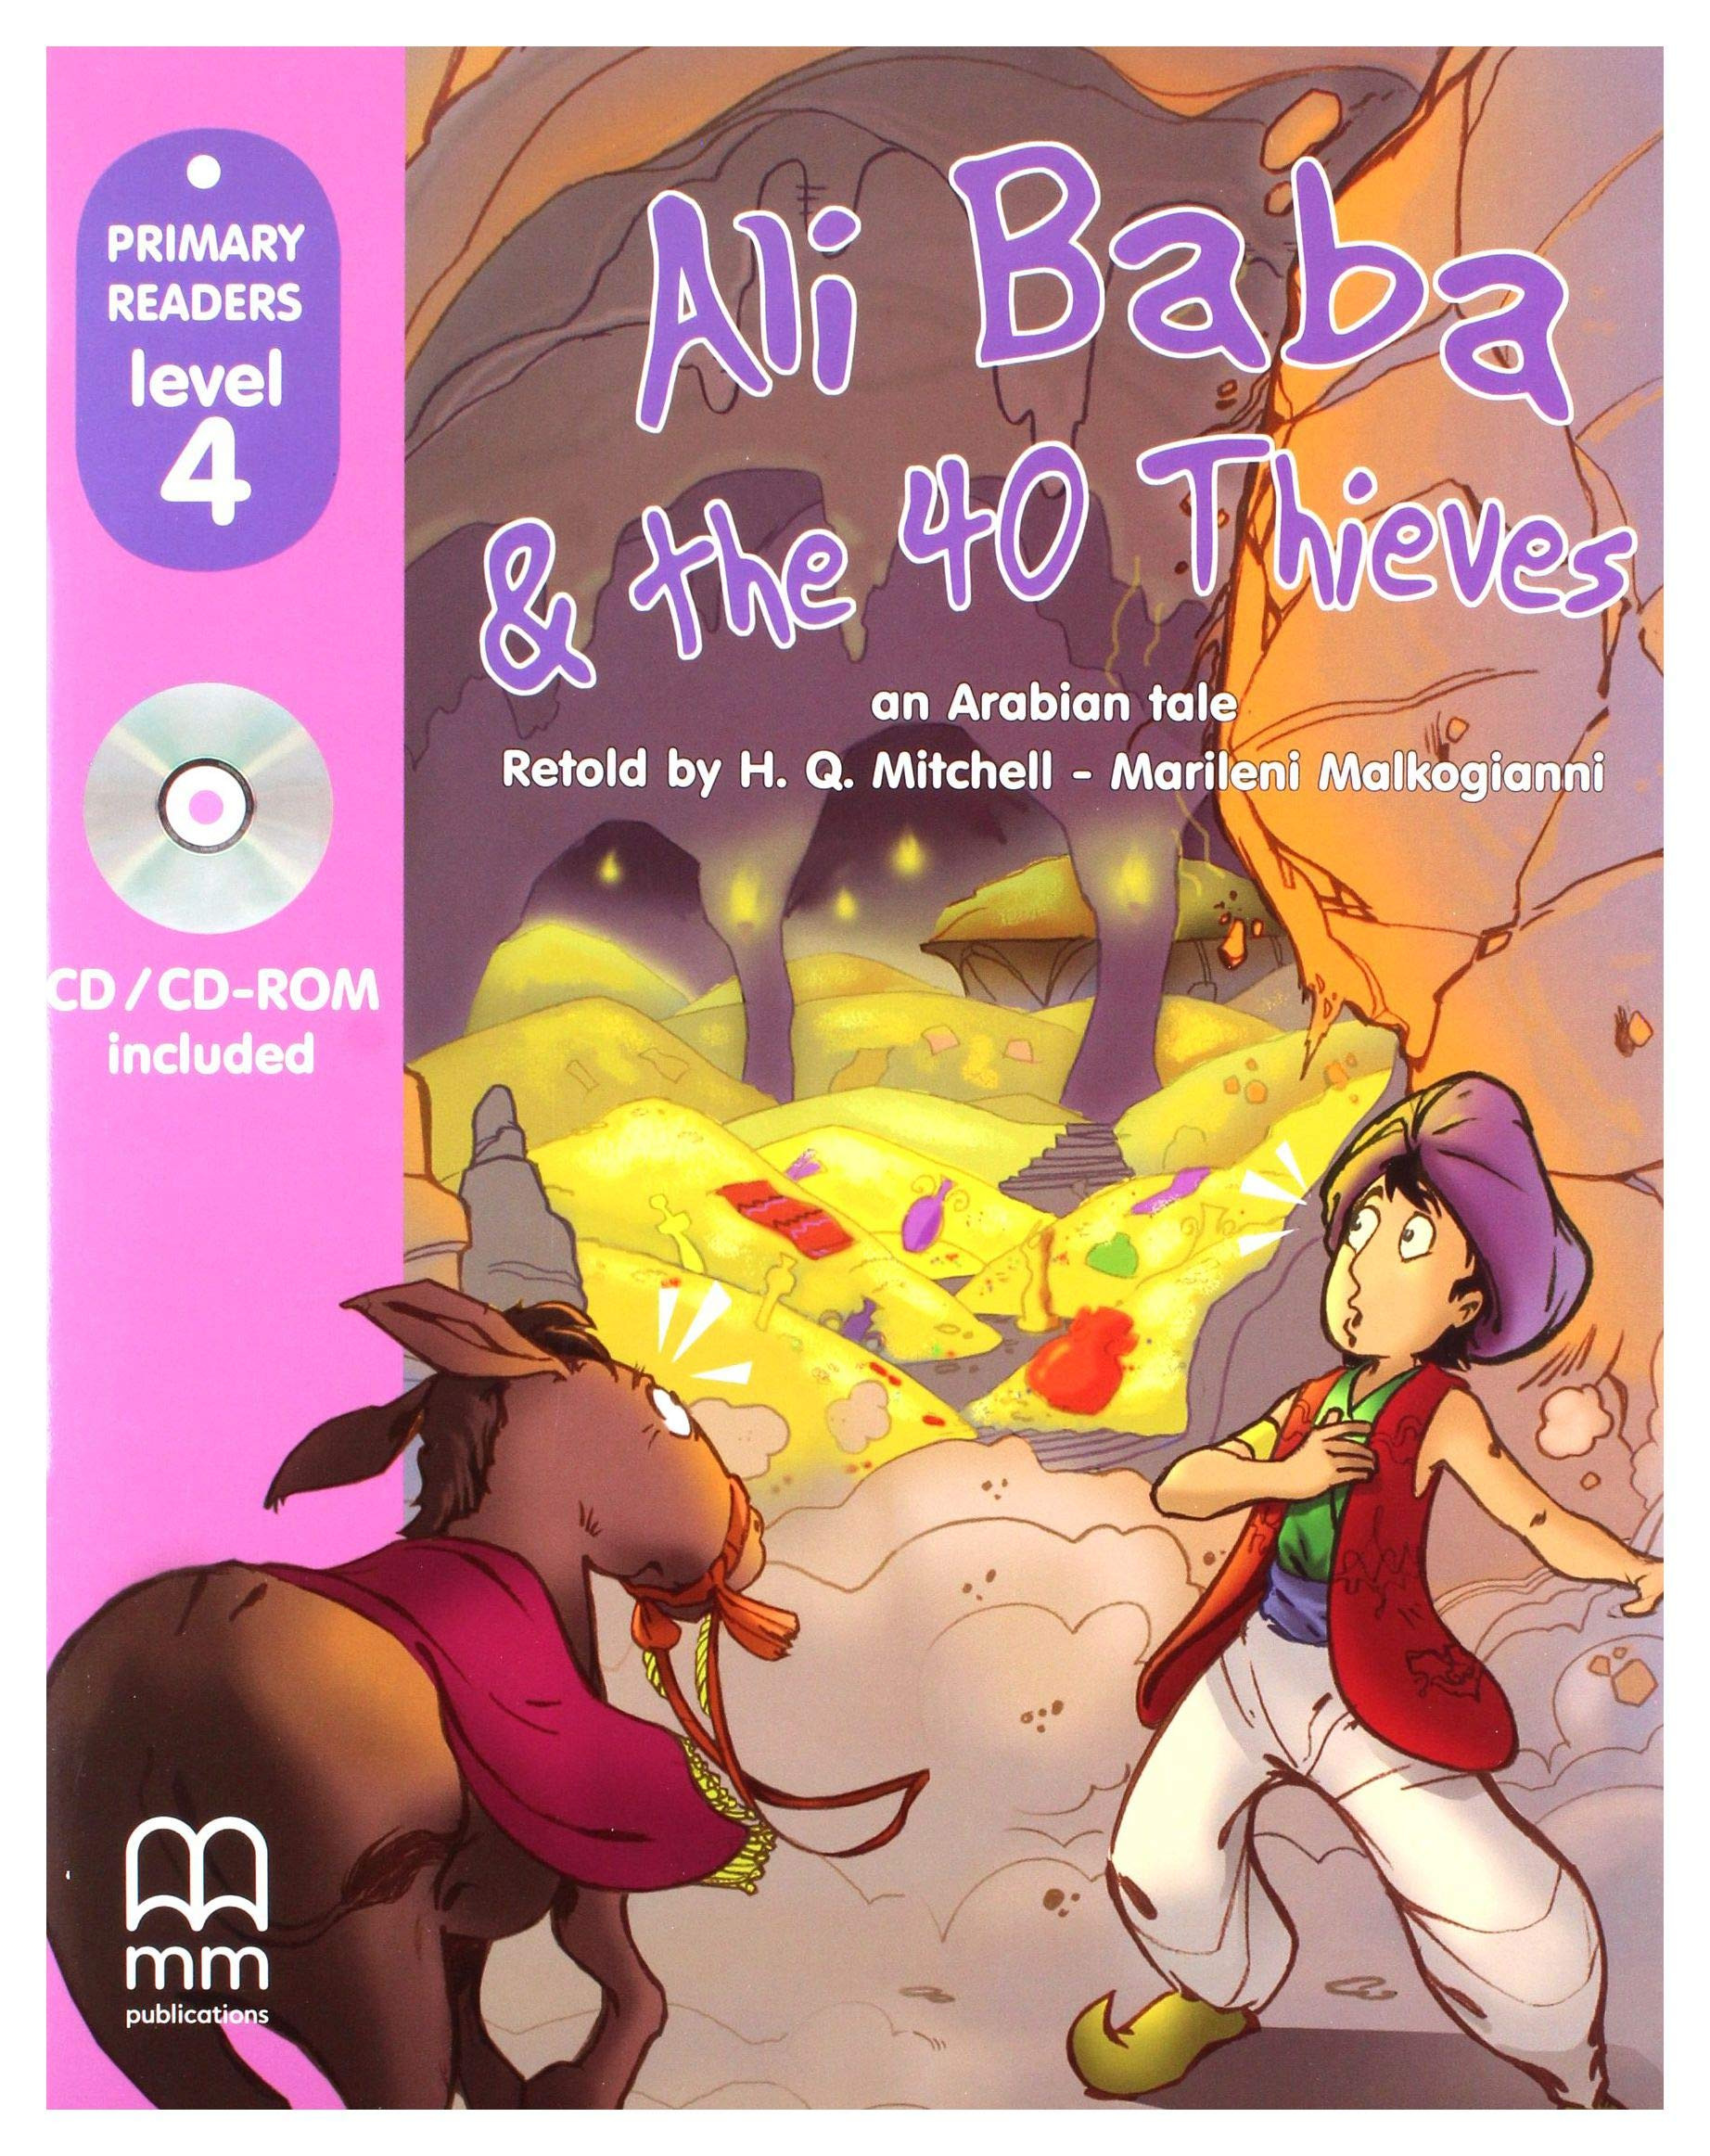 Ali Baba & the 40 thieves